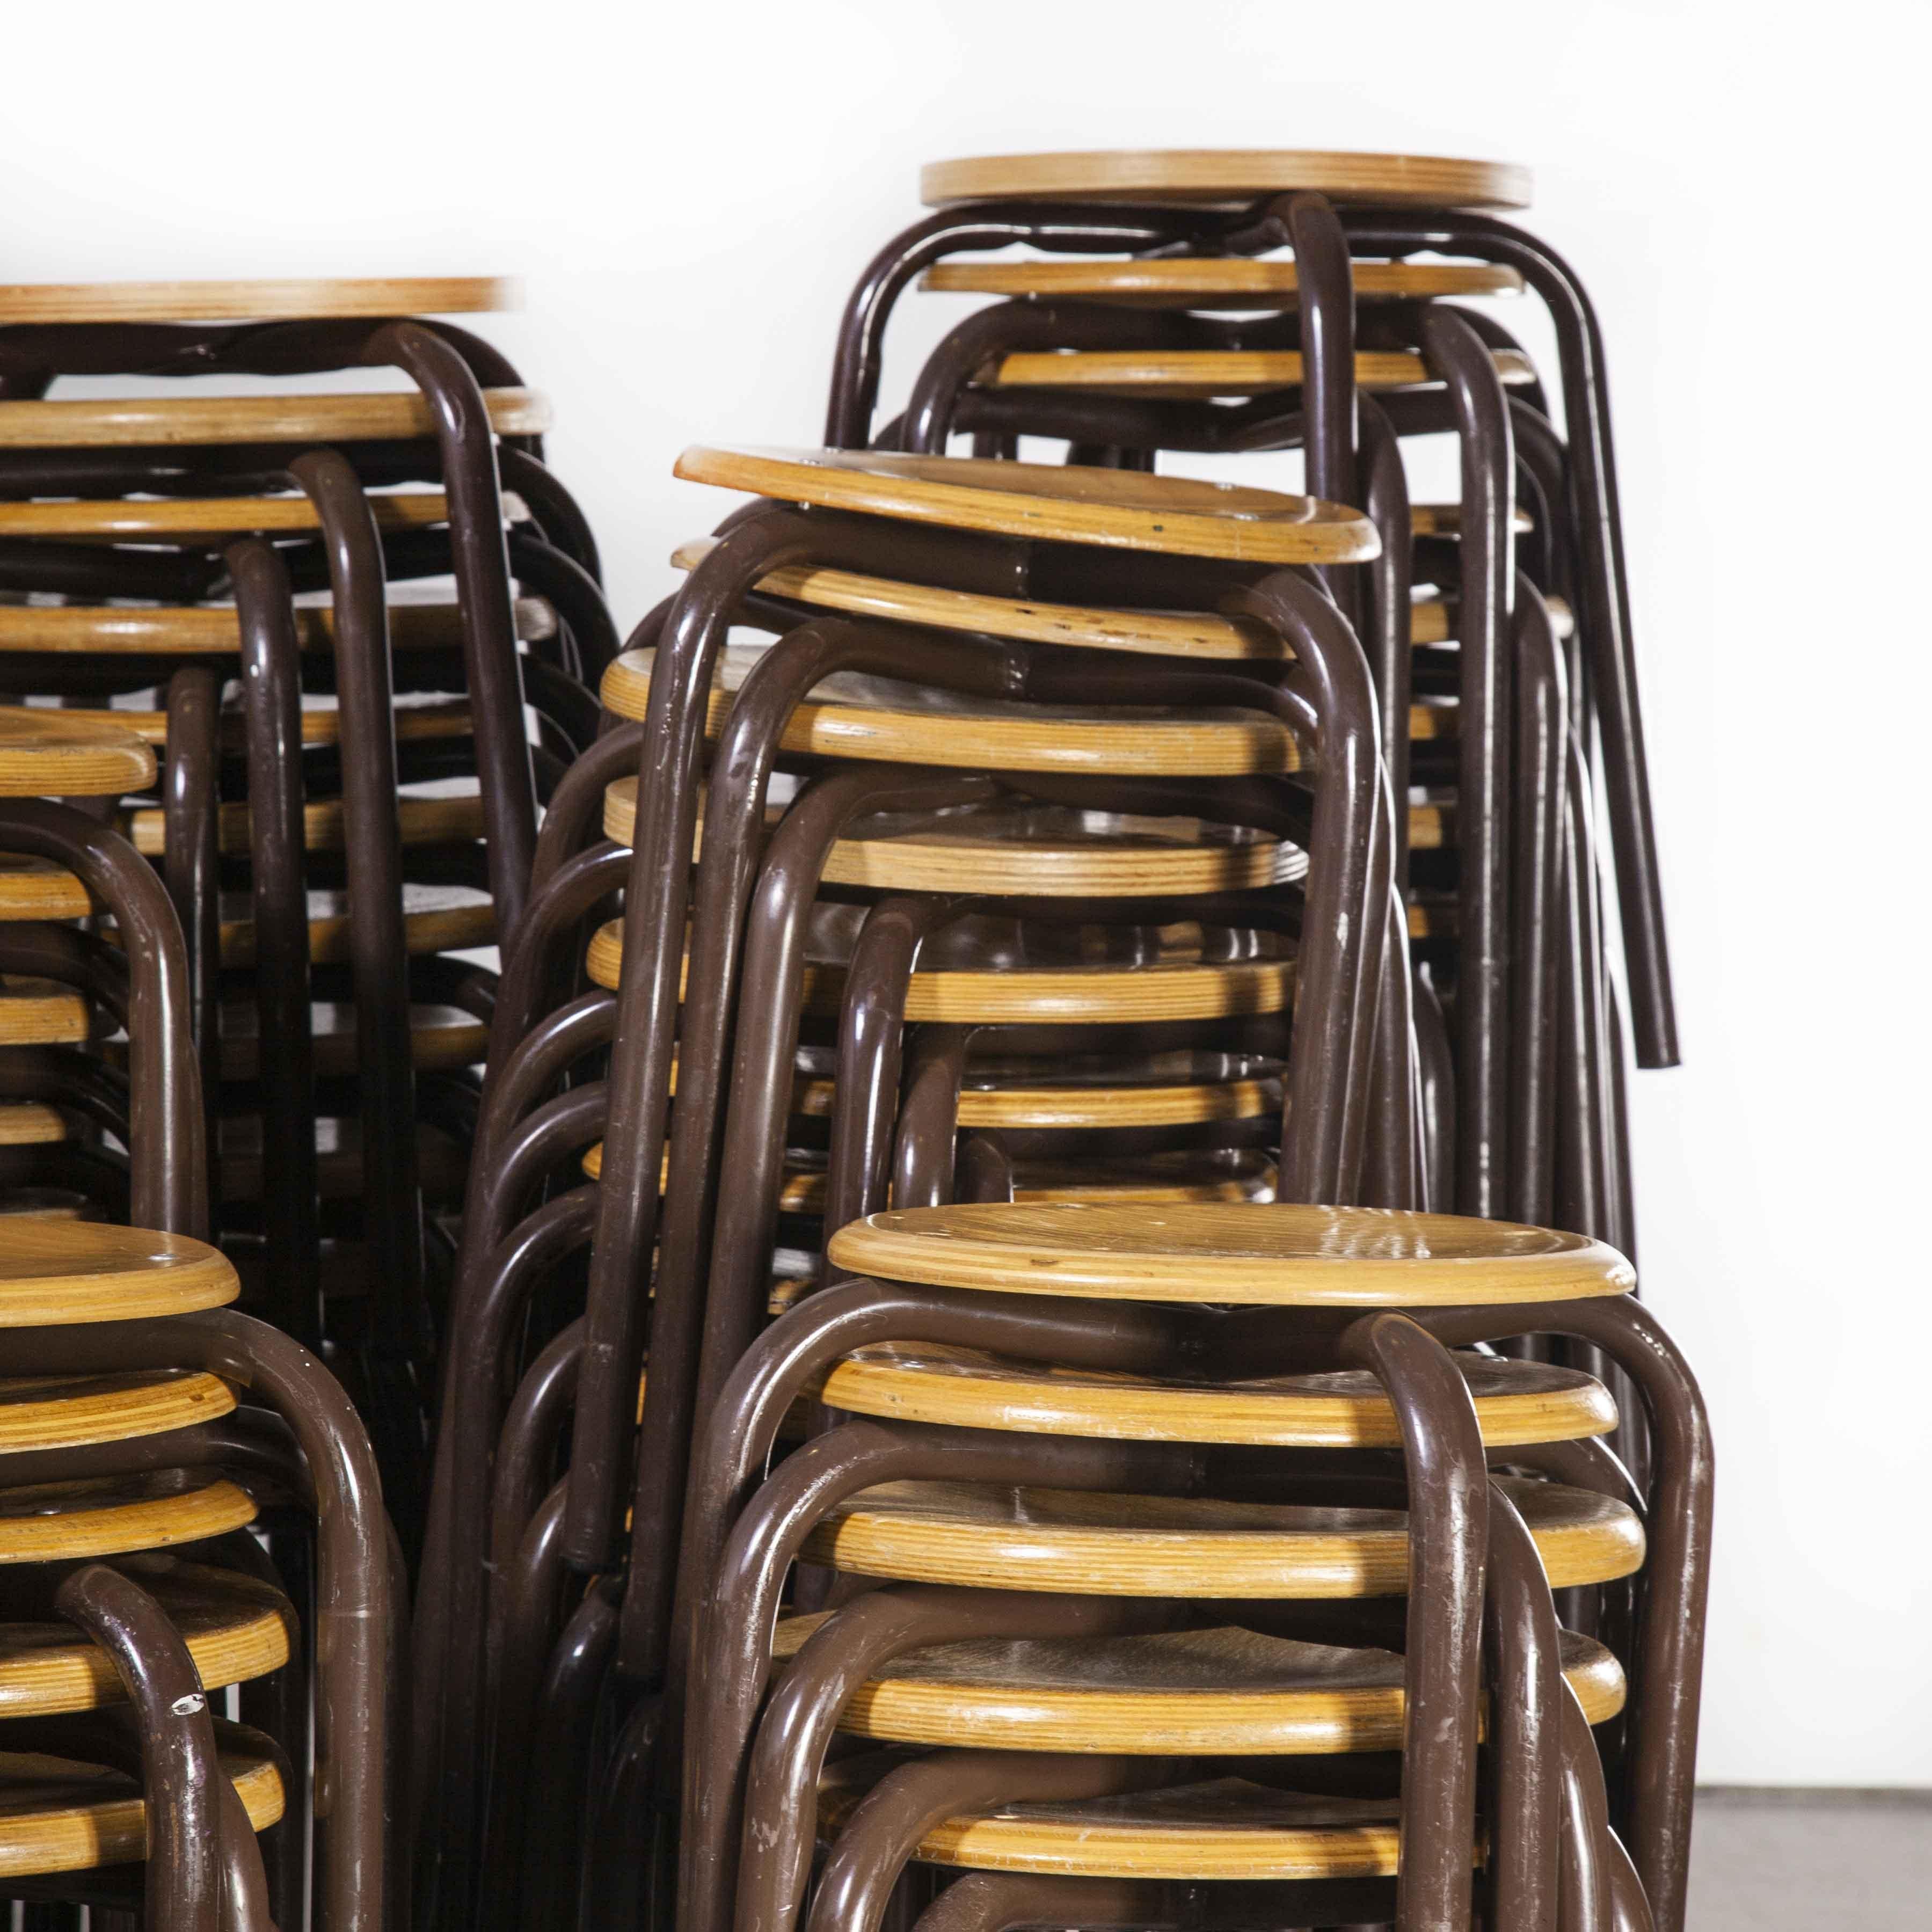 1960's Simple French Stacking School Stools - Brown - Varoious Quantities Available.
1960's Simple French Stacking School Stools - Brown - Varoious Quantities Available. Classic French school stools, solid beech laminated tops with strong metal